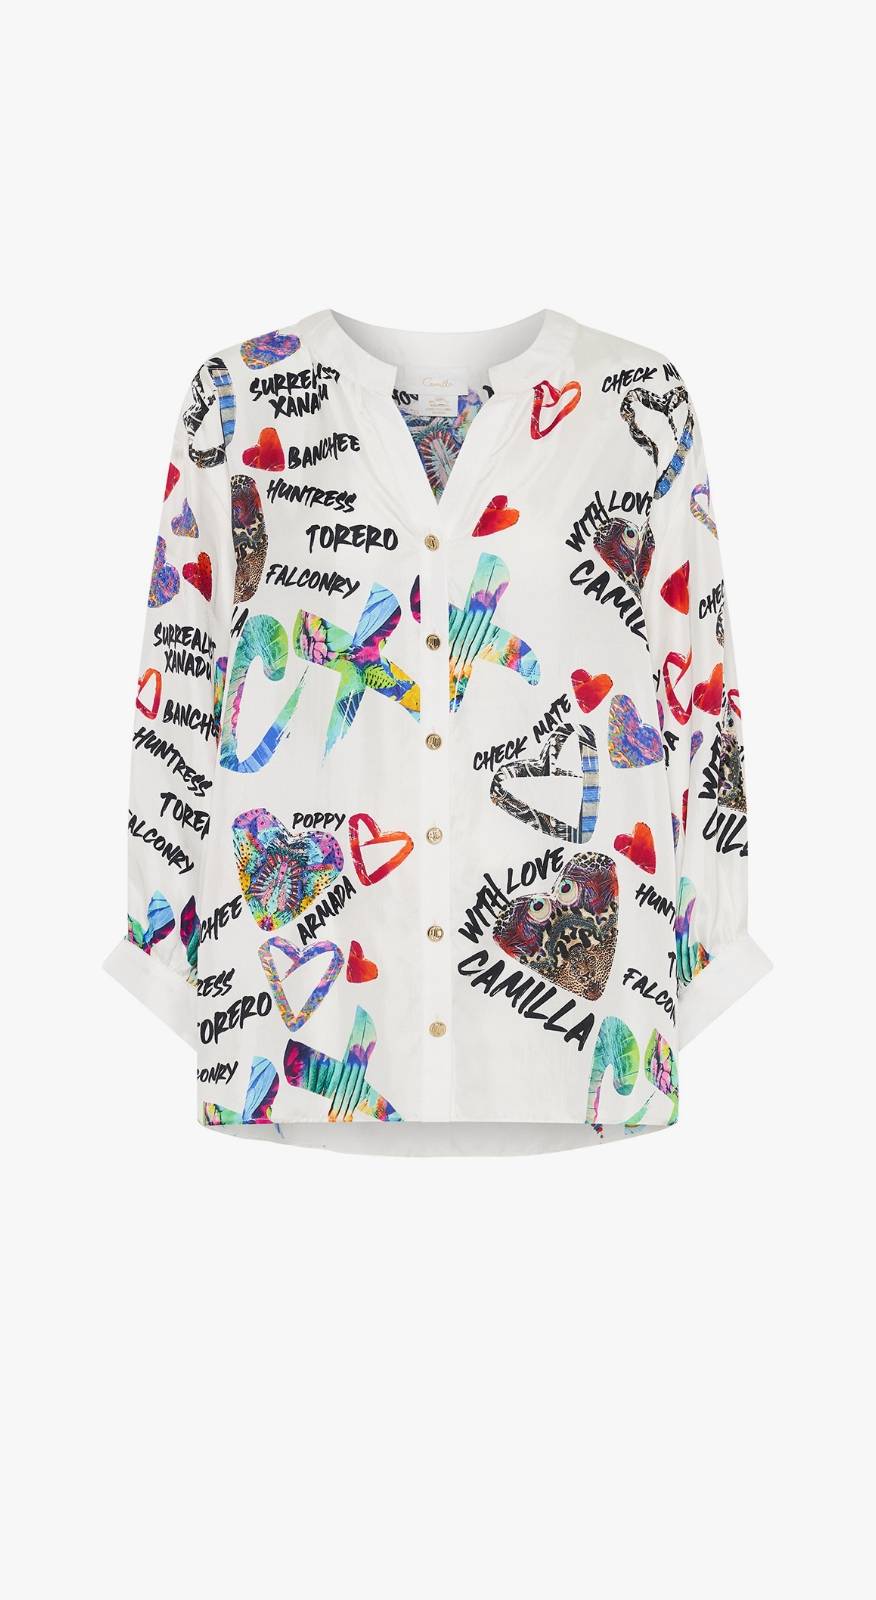 CAMILLA new season white and graphic printed button up top on grey background